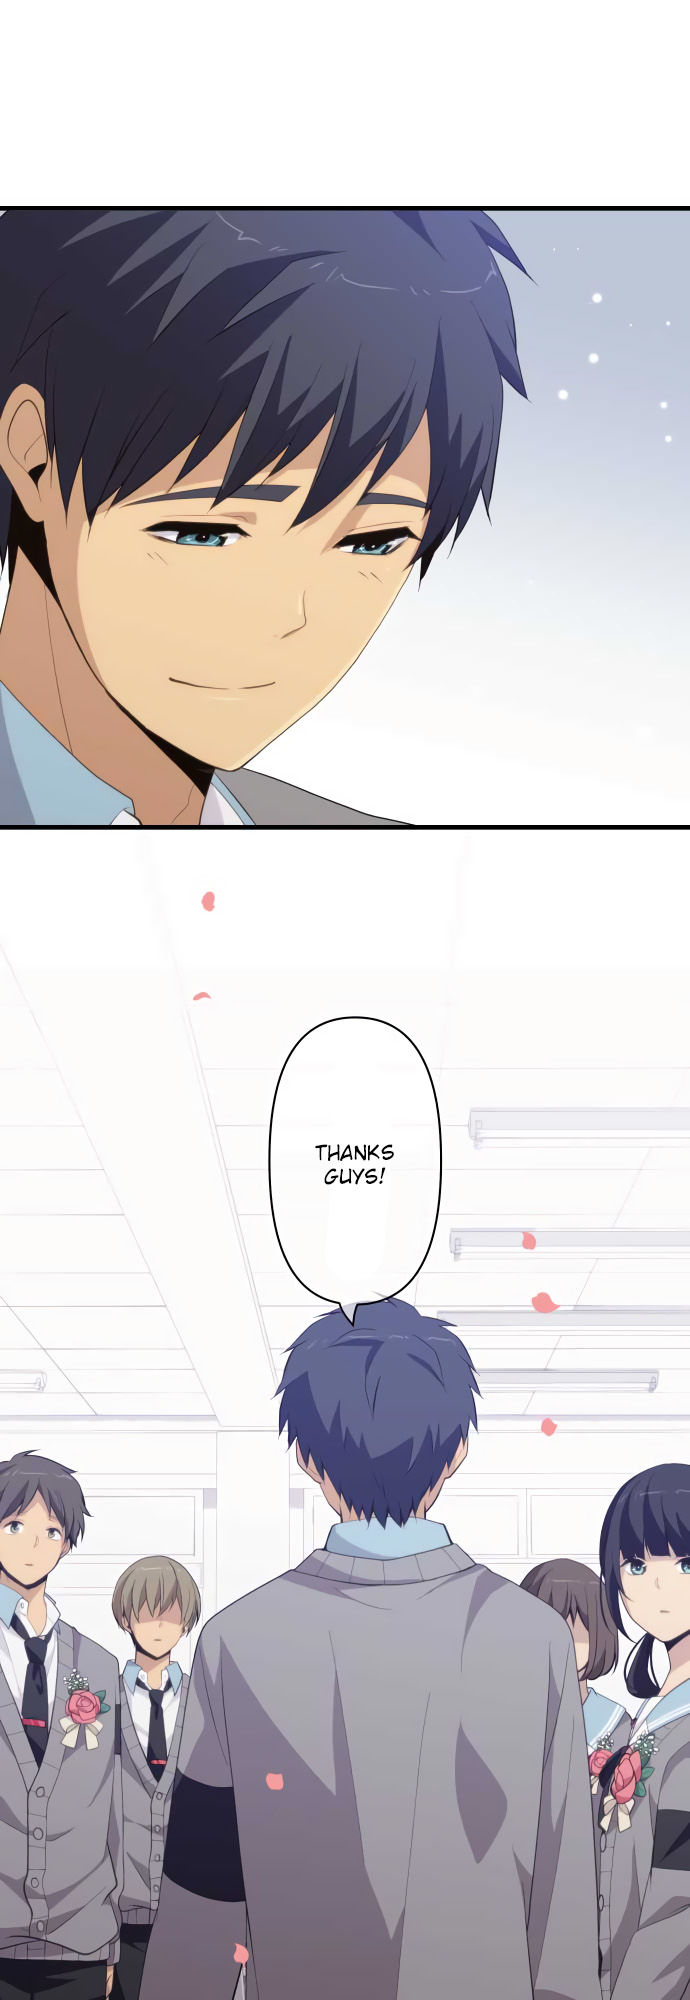 Relife 211 13